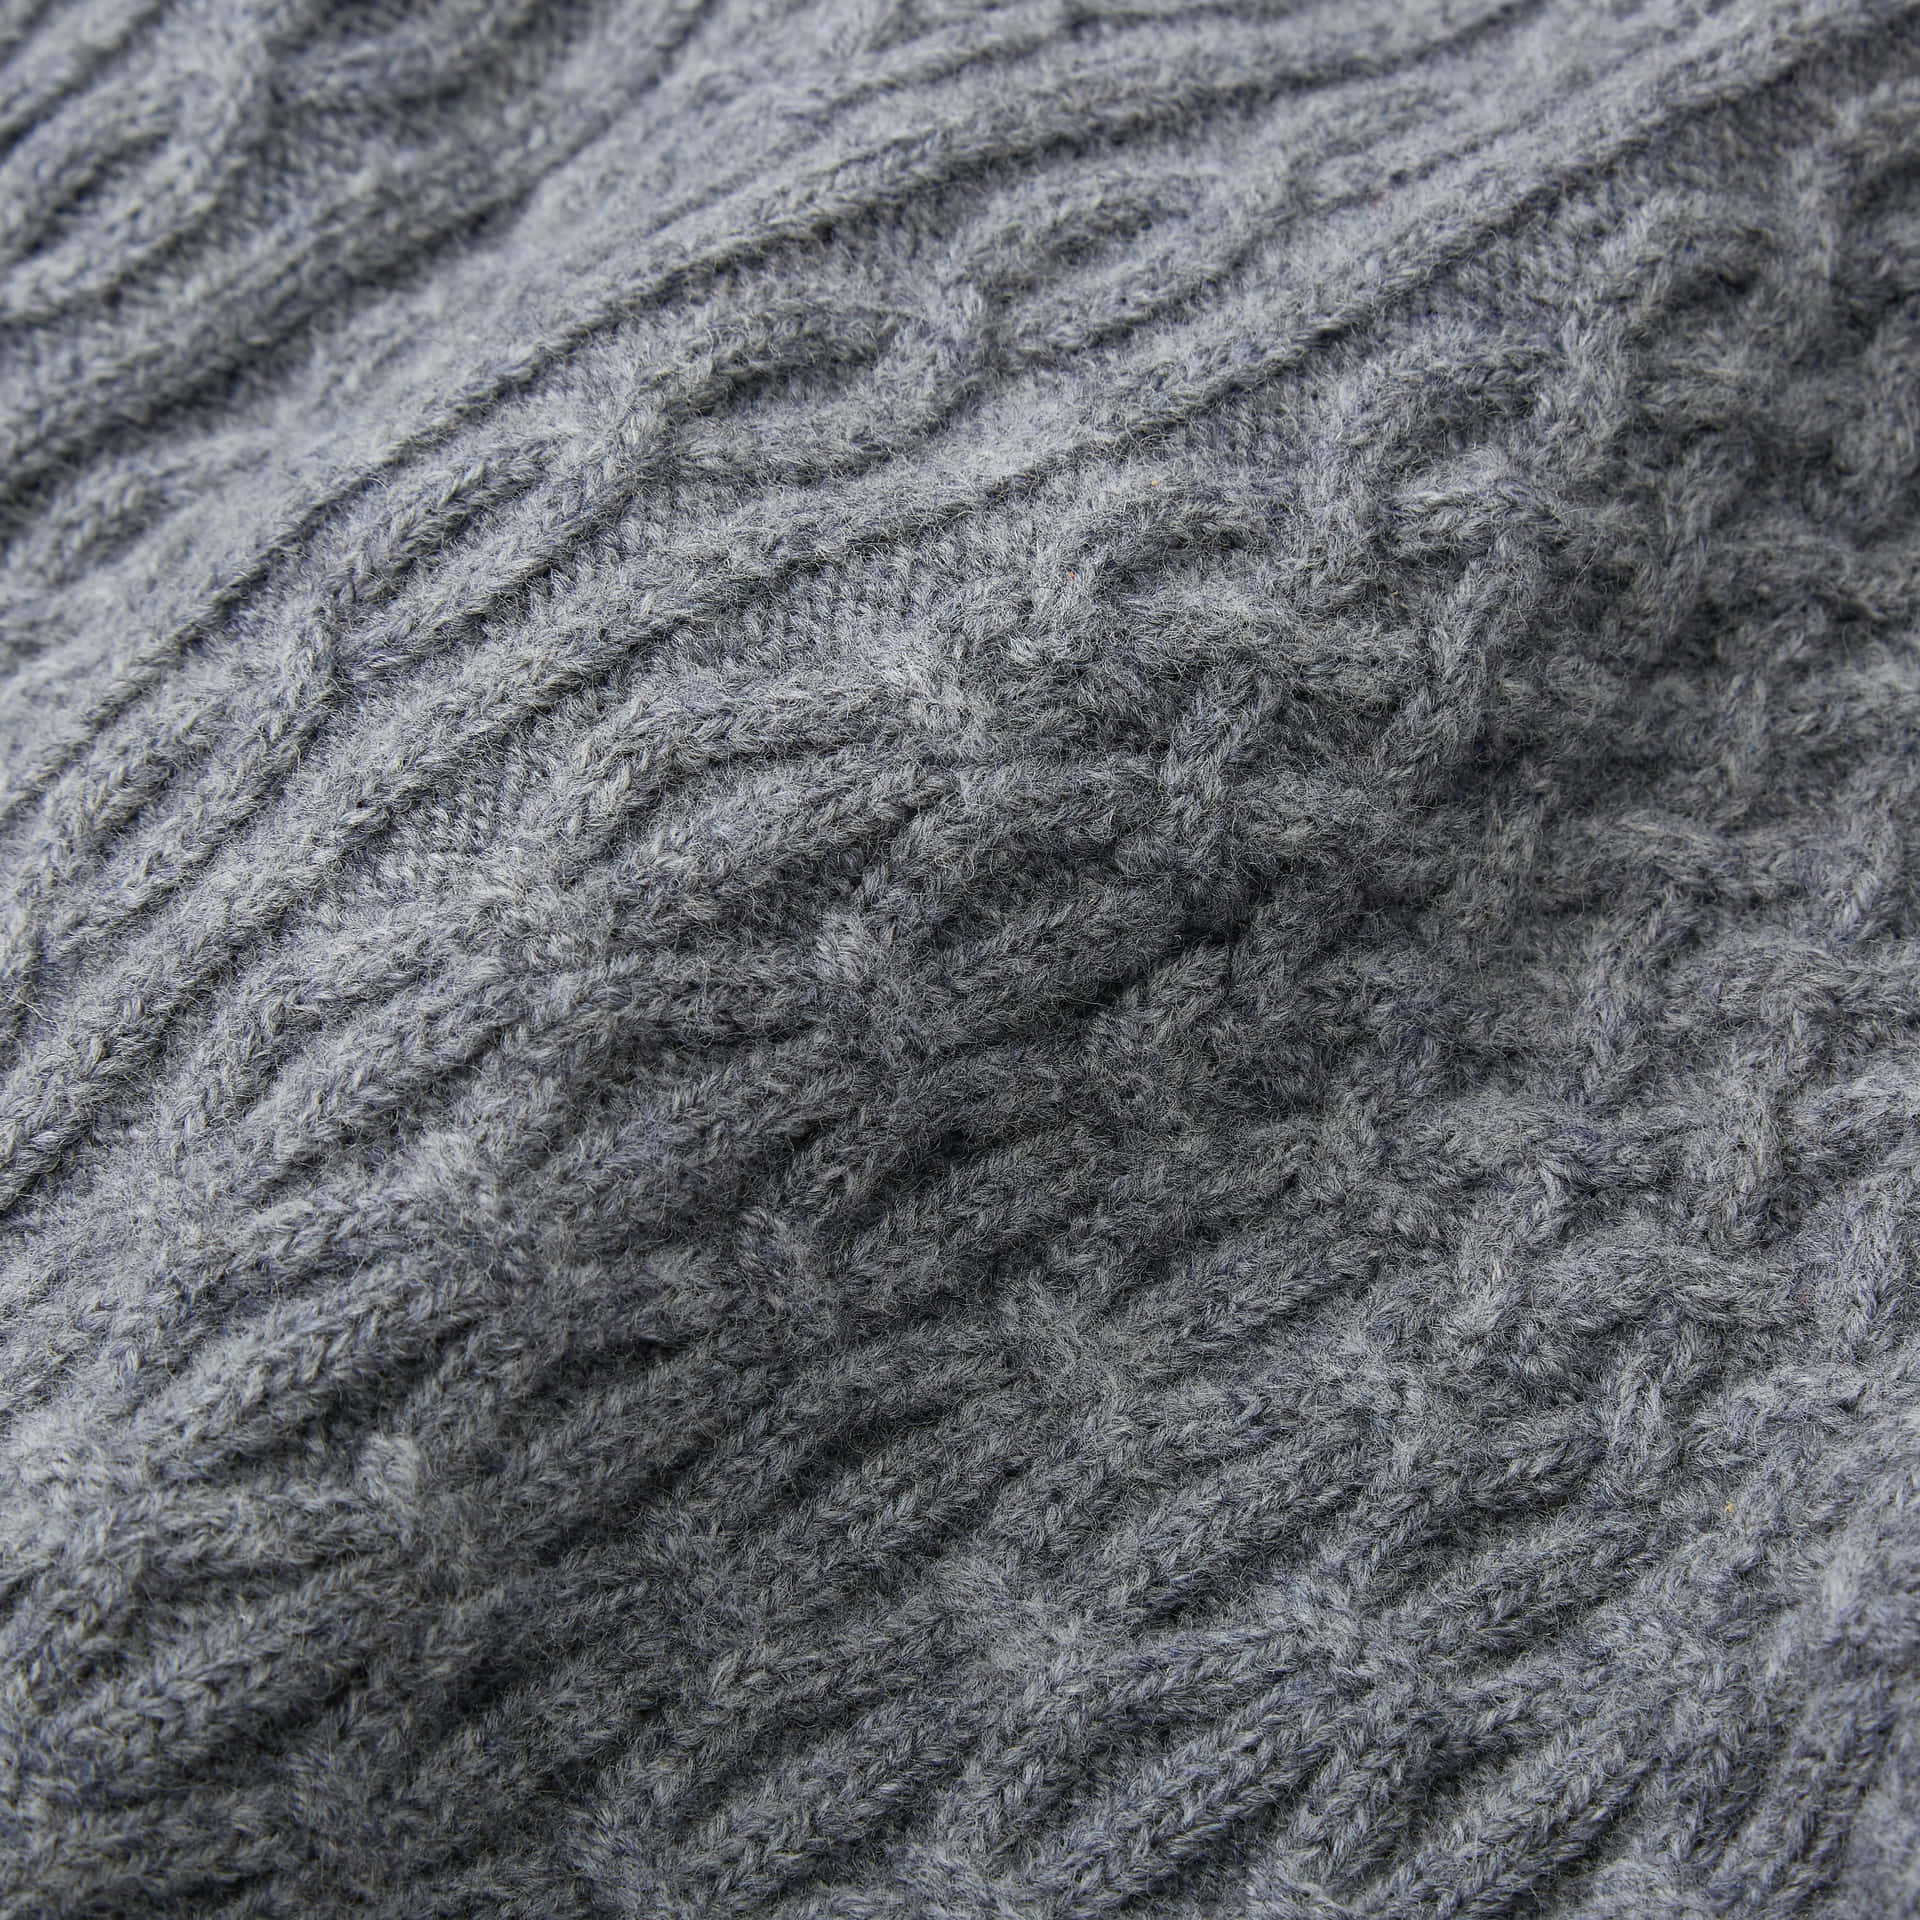 Download Exquisite High-resolution Knitted Wool Texture Wallpaper ...